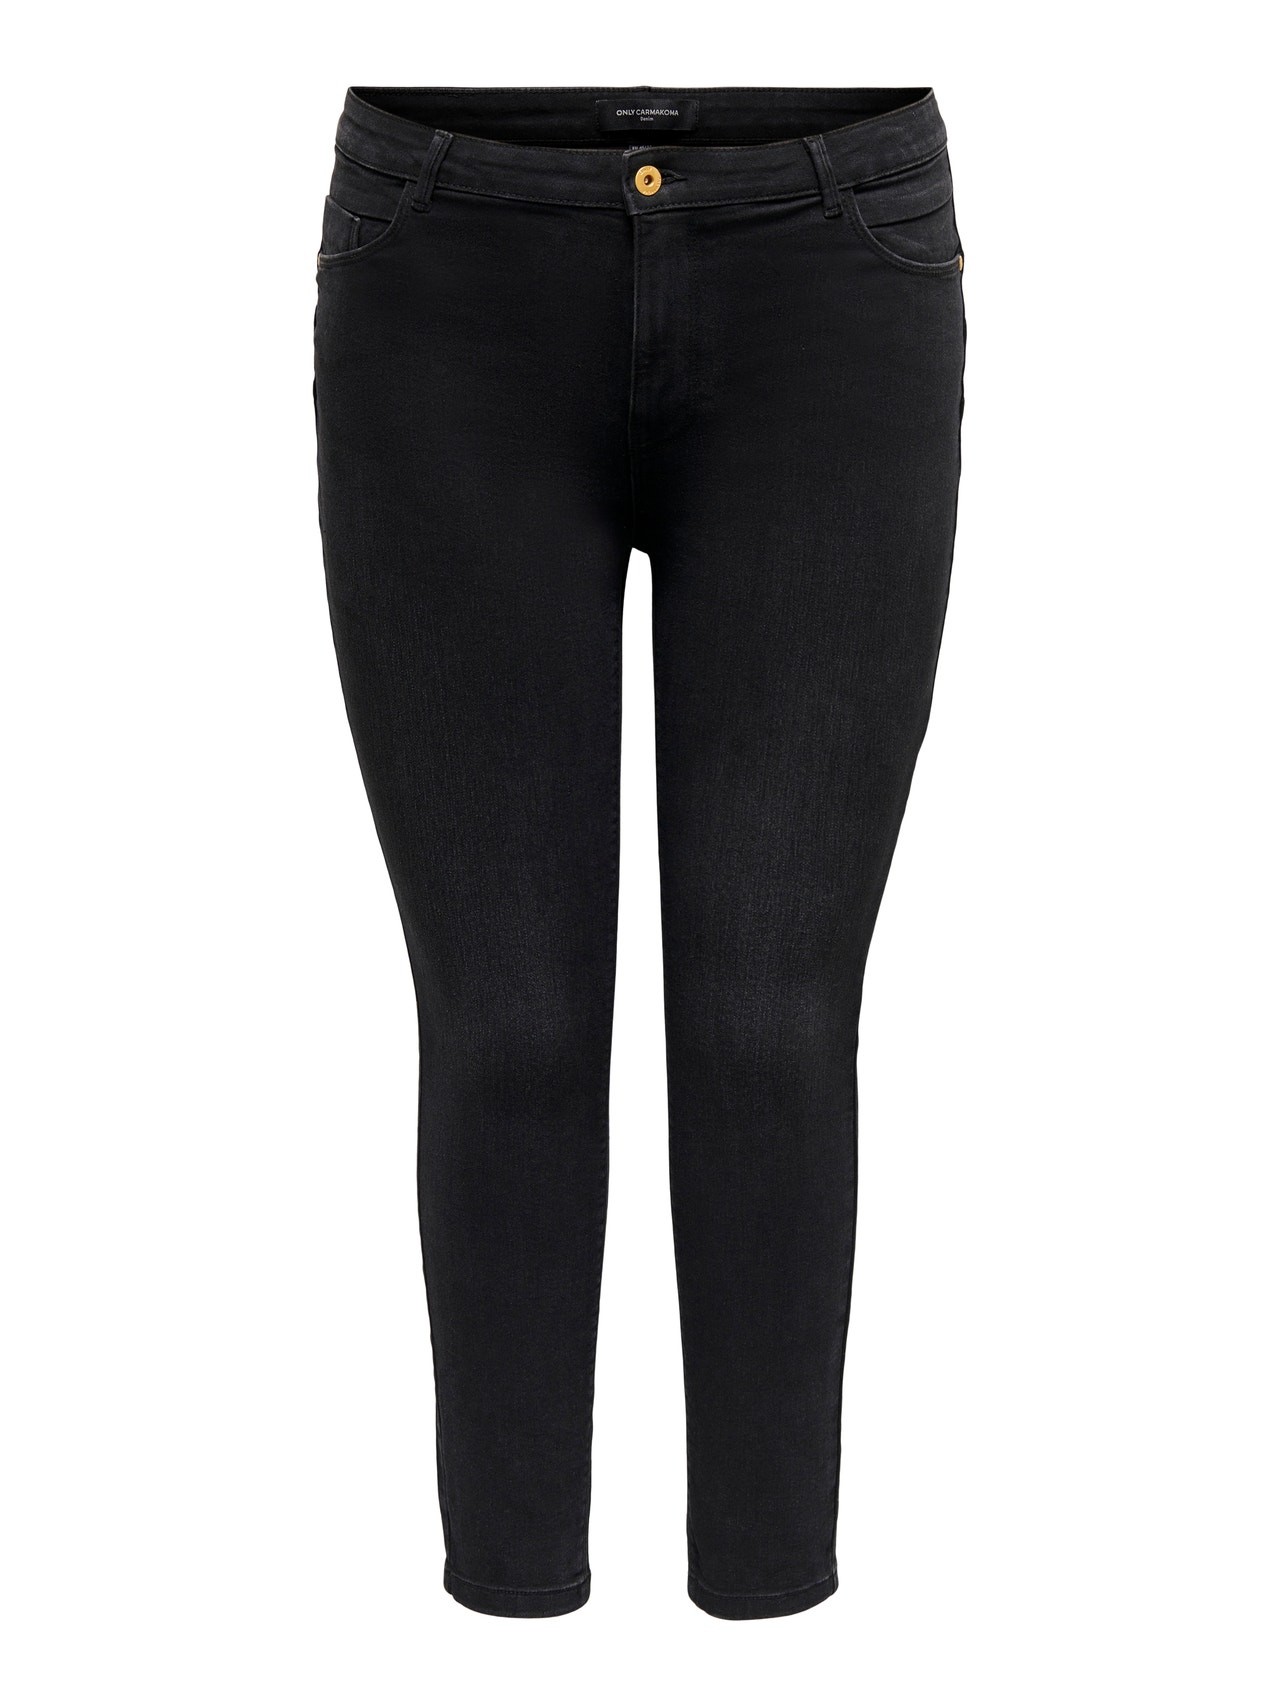 ONLY CARPaisy efecto push up Jeans skinny fit -Black Denim - 15251372